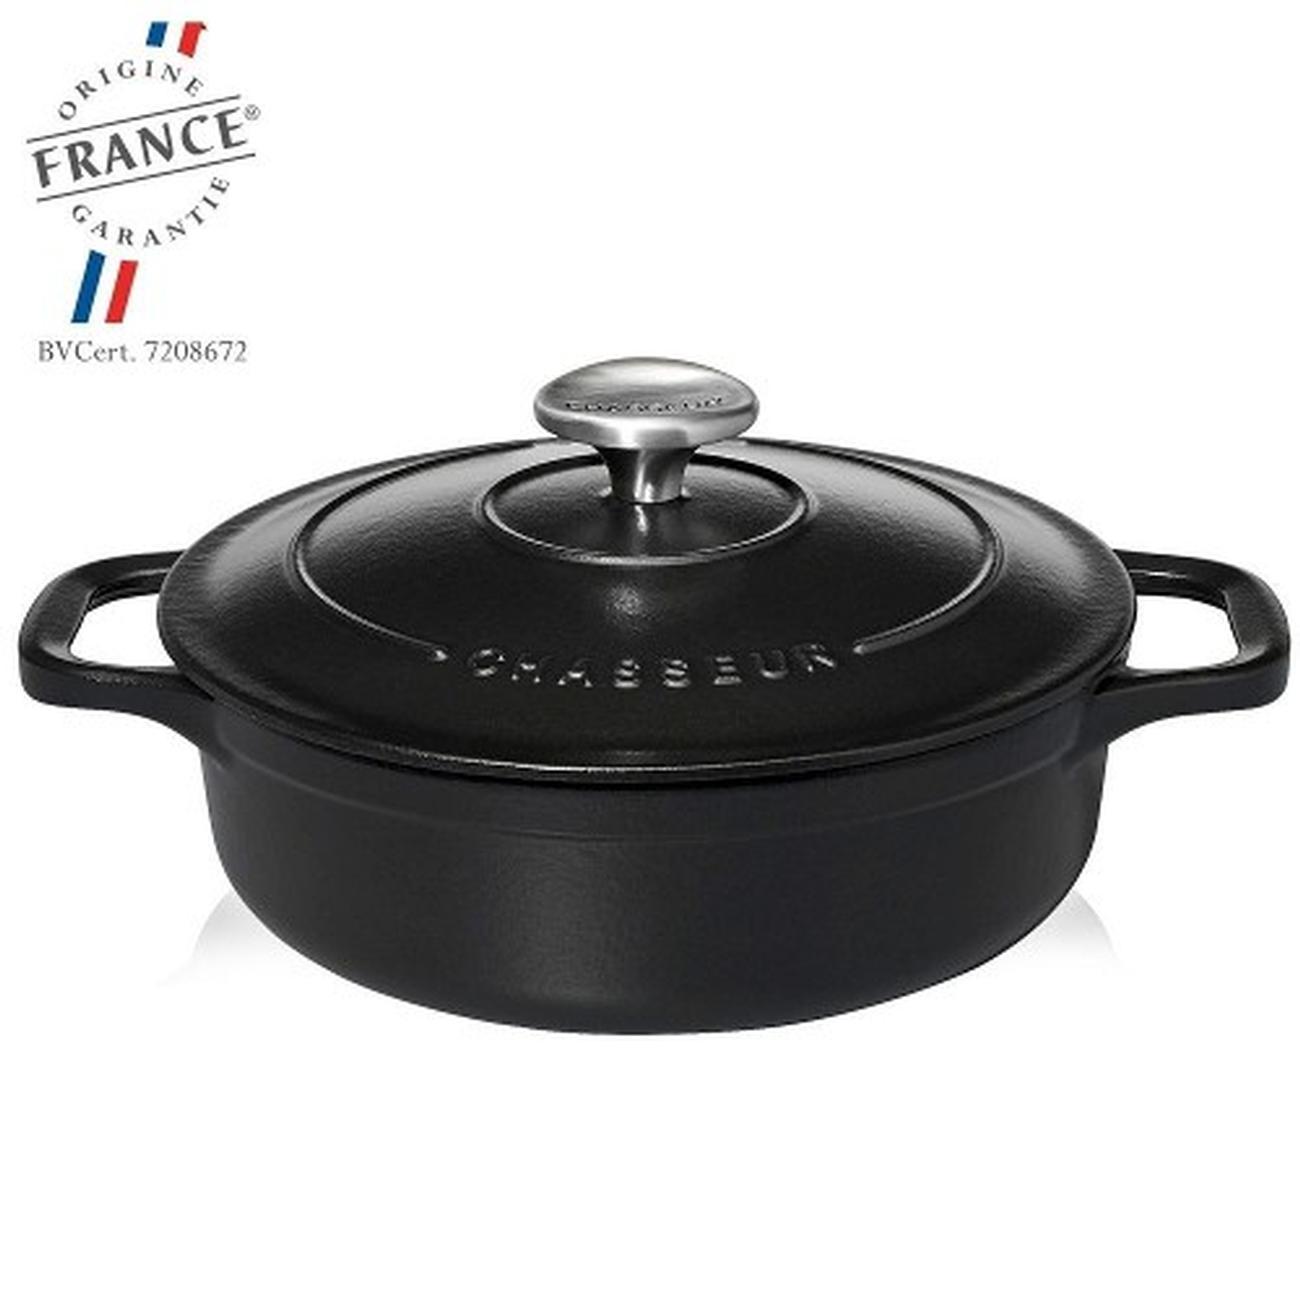 https://www.thekitchenwhisk.ie/contentfiles/productImages/Large/chasseur-casserole-shallow-round-30cm-blackmatte-3.jpg